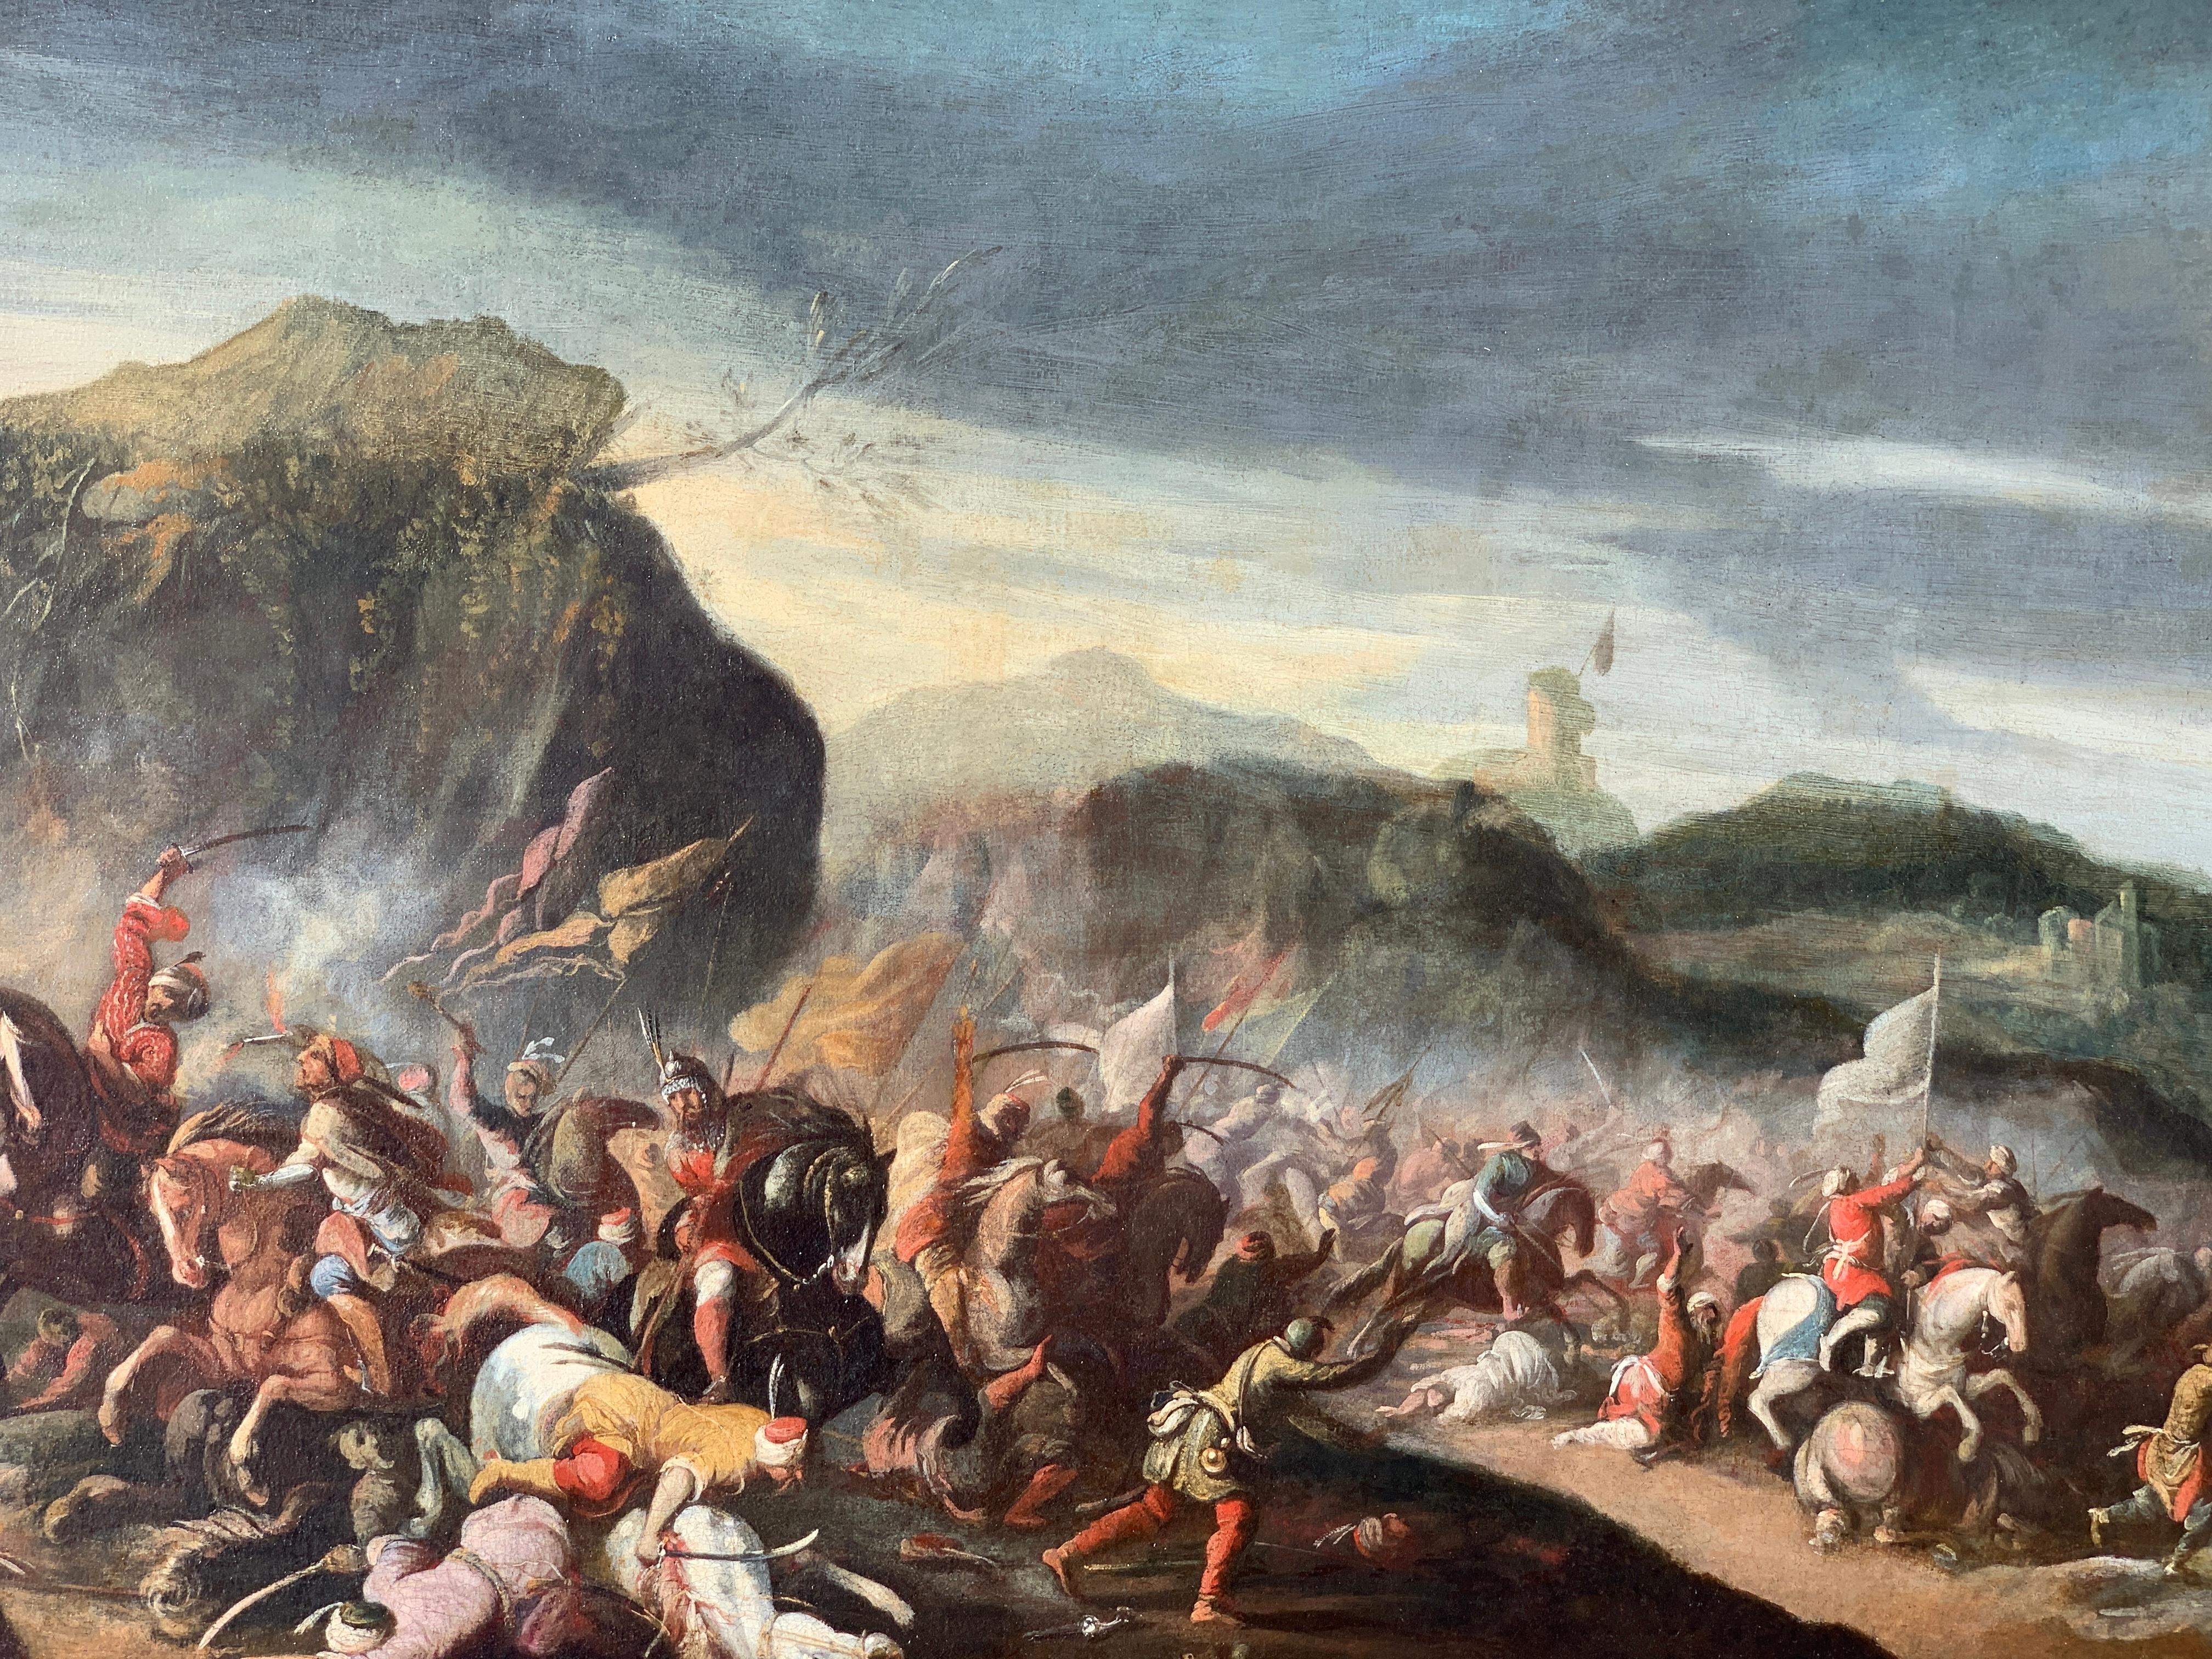 17th century Italian Horse Battle scene between Crusaders and their enemy - Painting by Jacques Courtois